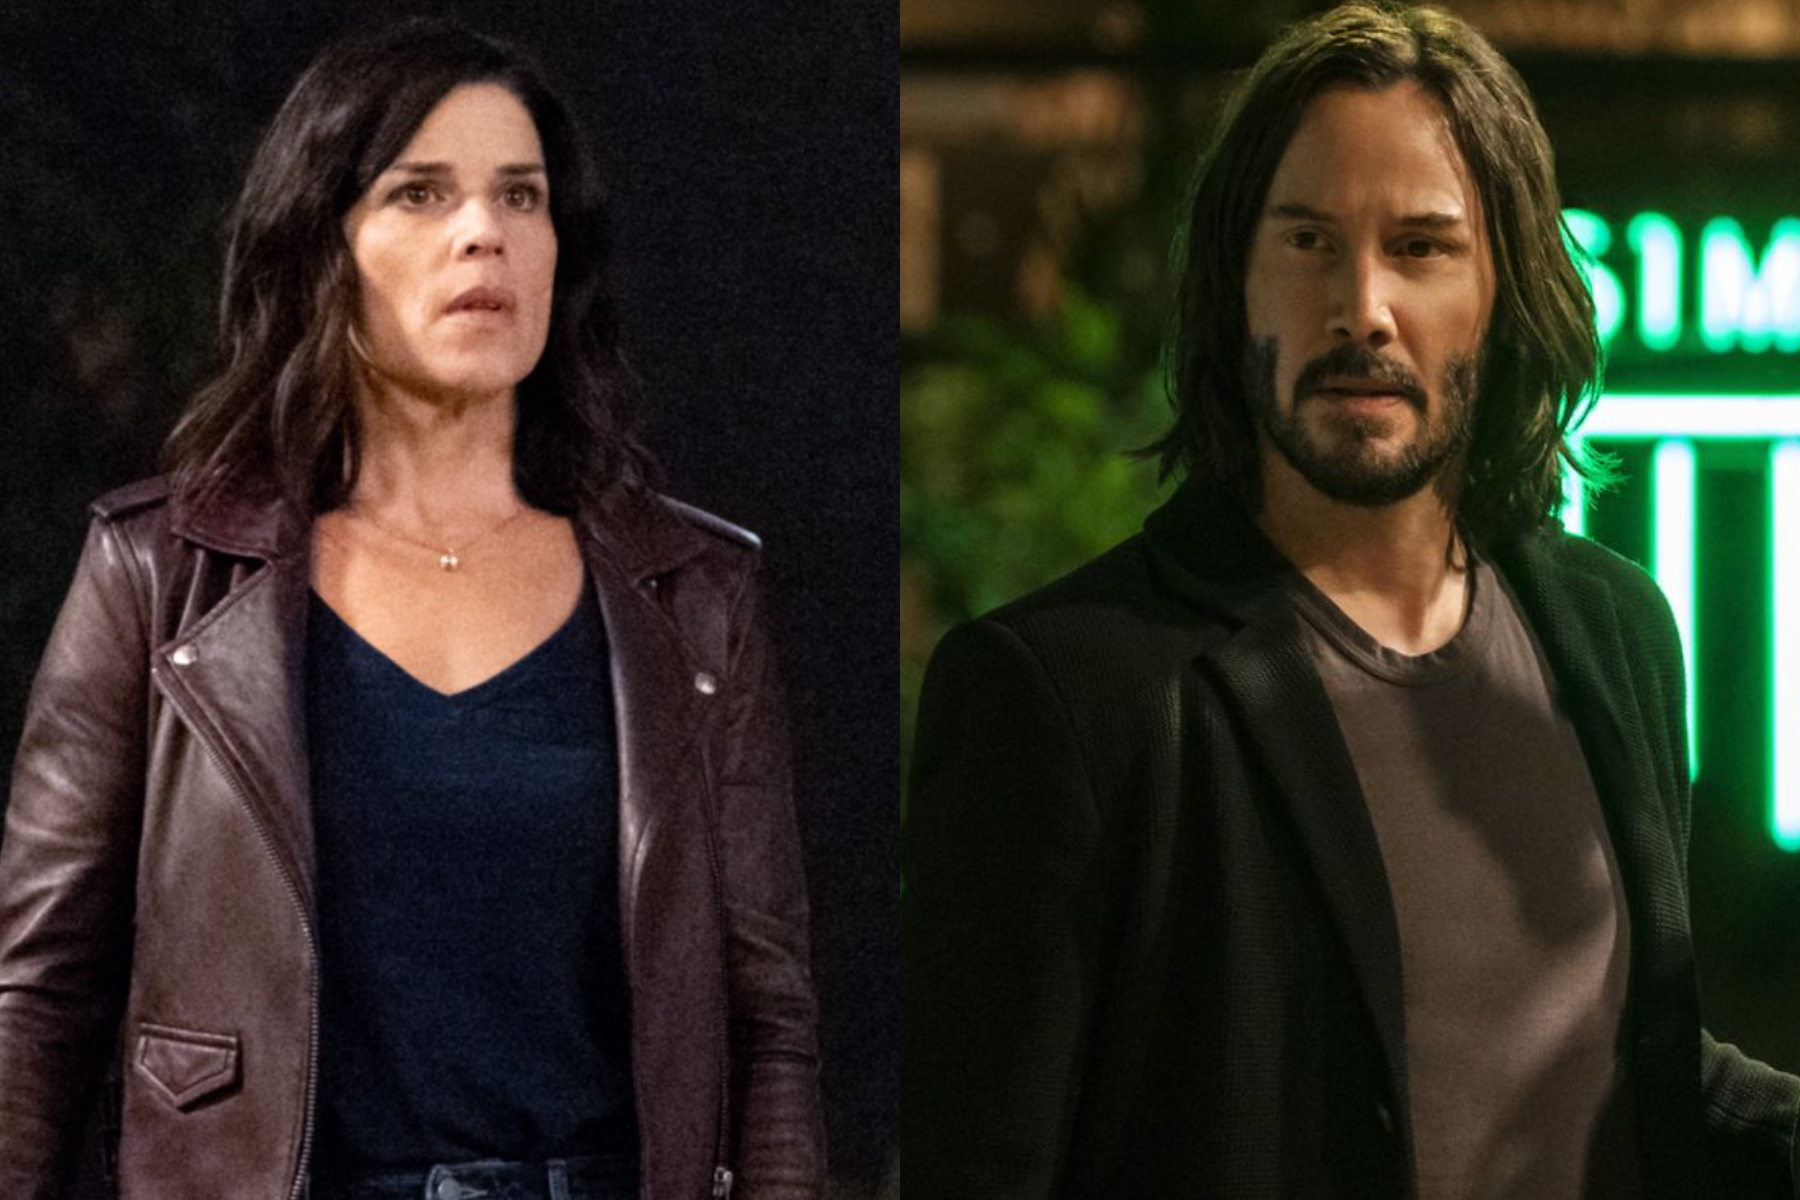 Neve Campbell in Scream 5 and Keanu Reeves in Matrix 4.